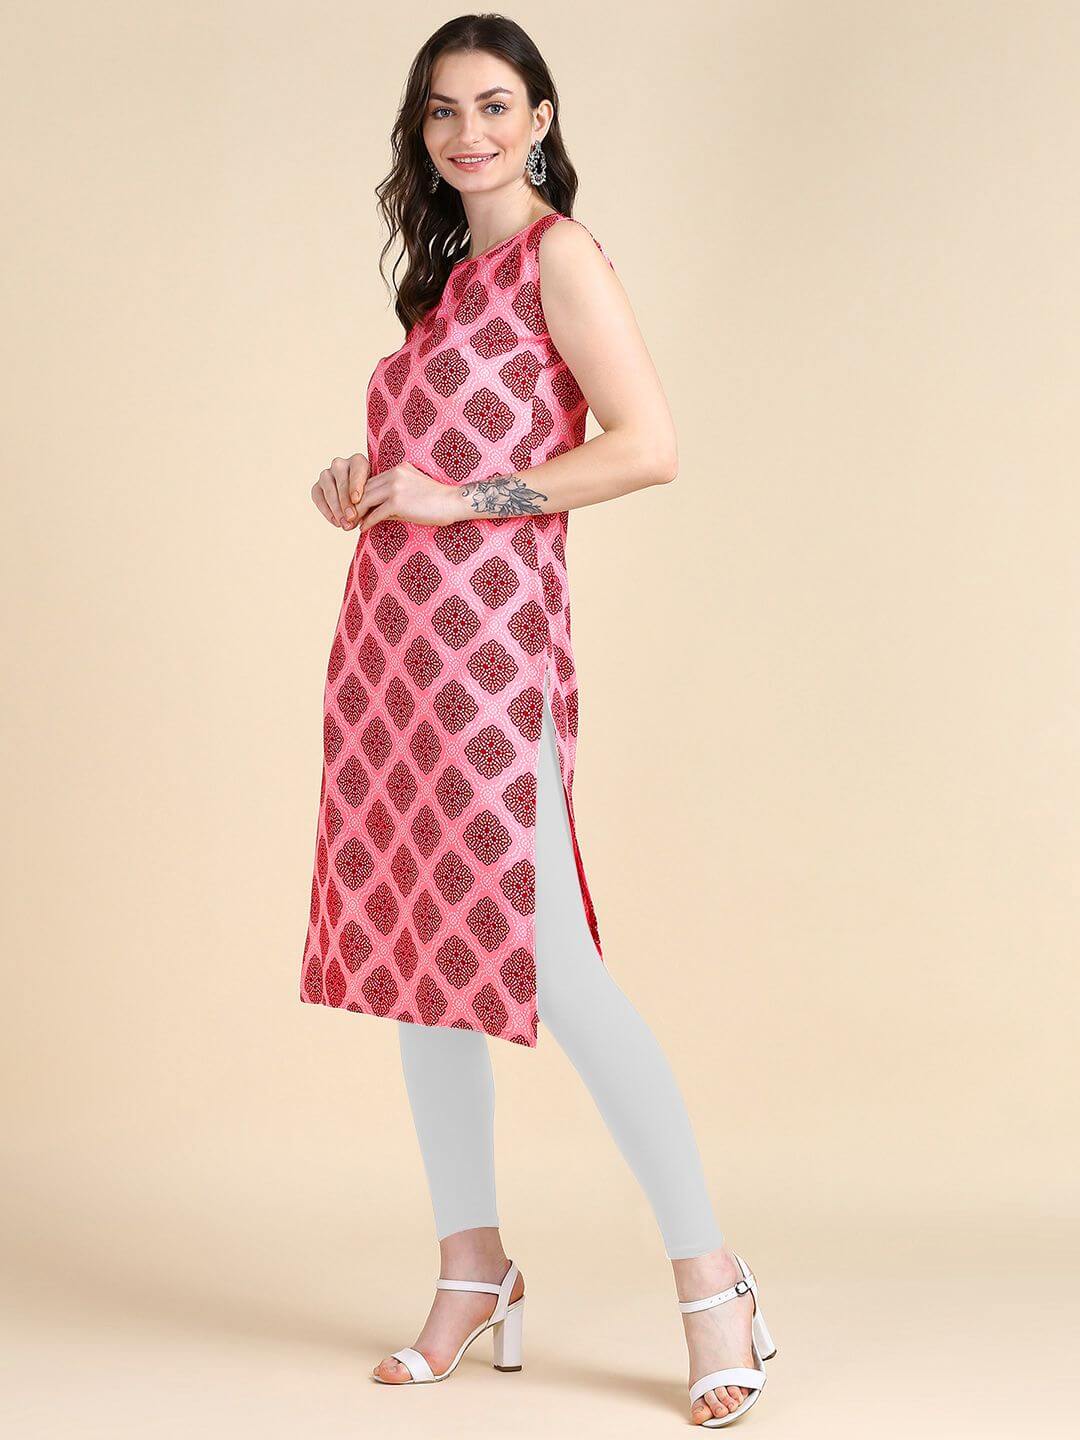 Women's Sleeveless Boat Neck Solid Casual Fancy Long Kurtis - Bright Wear  at Rs 567.00, Ludhiana | ID: 2853007217297